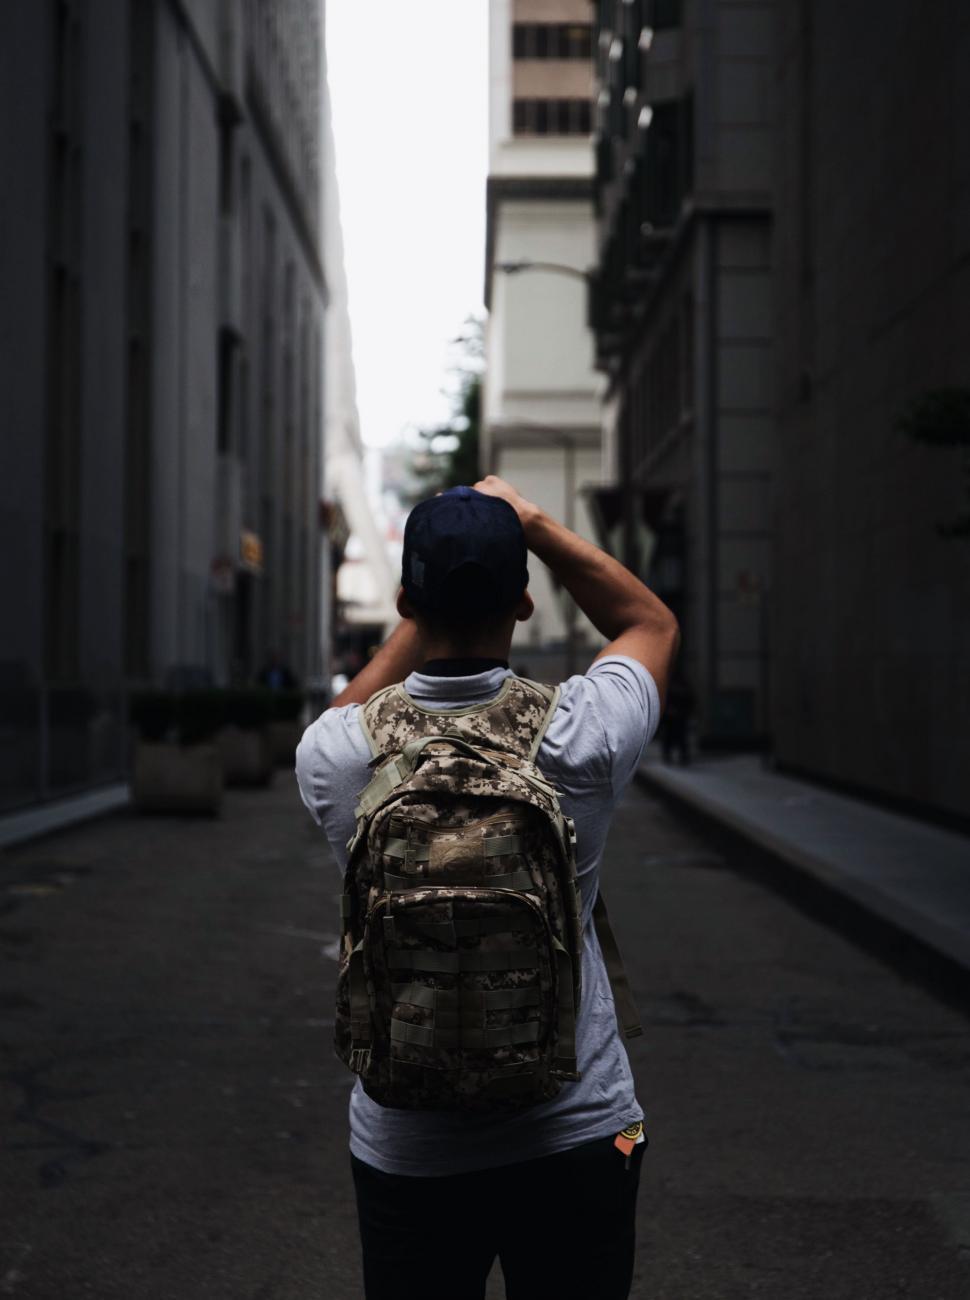 Free Image of Person Walking Down a Street With Backpack 